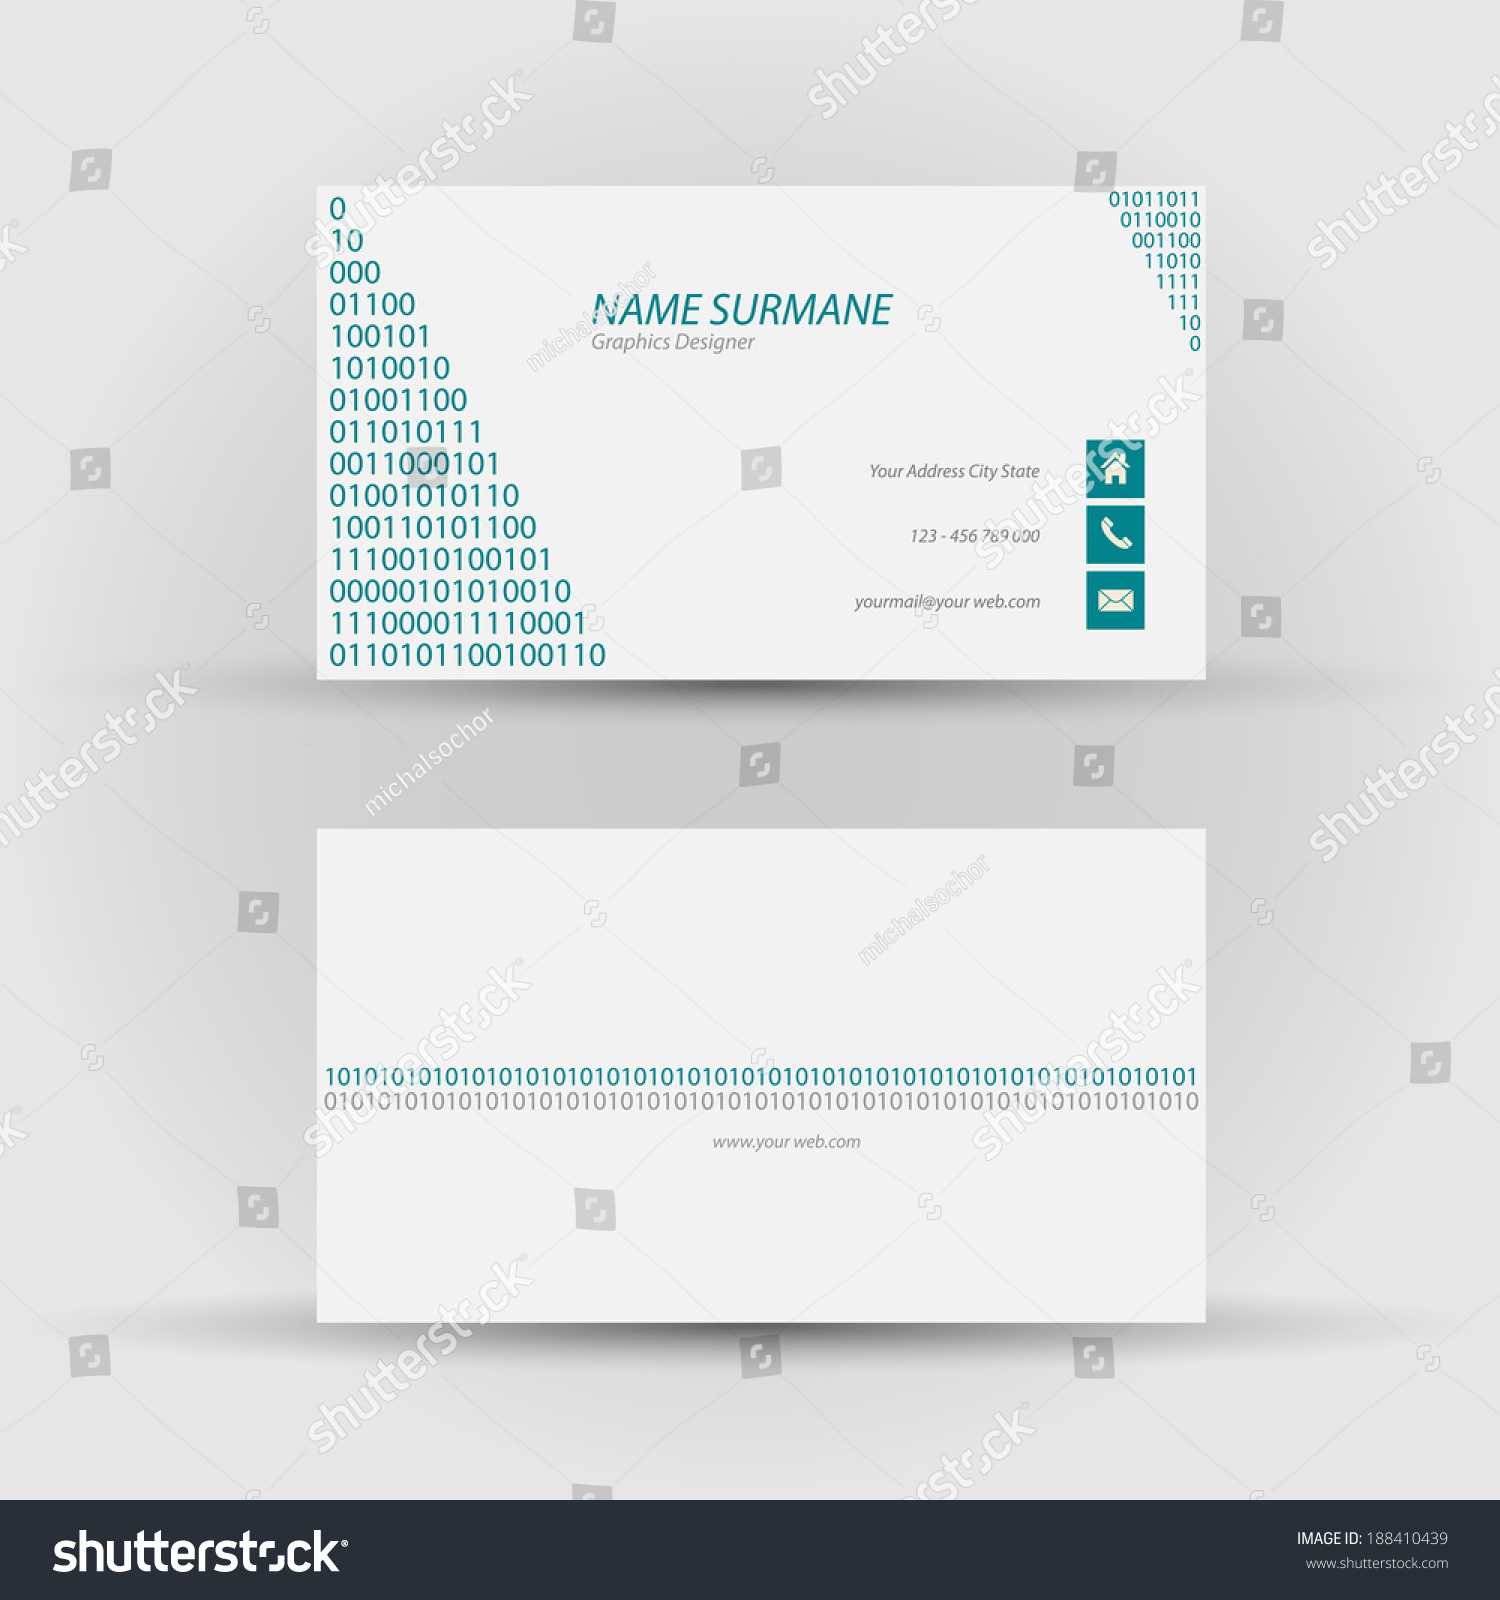 Front And Back Business Card Template Word ] – Here Is A Regarding Front And Back Business Card Template Word